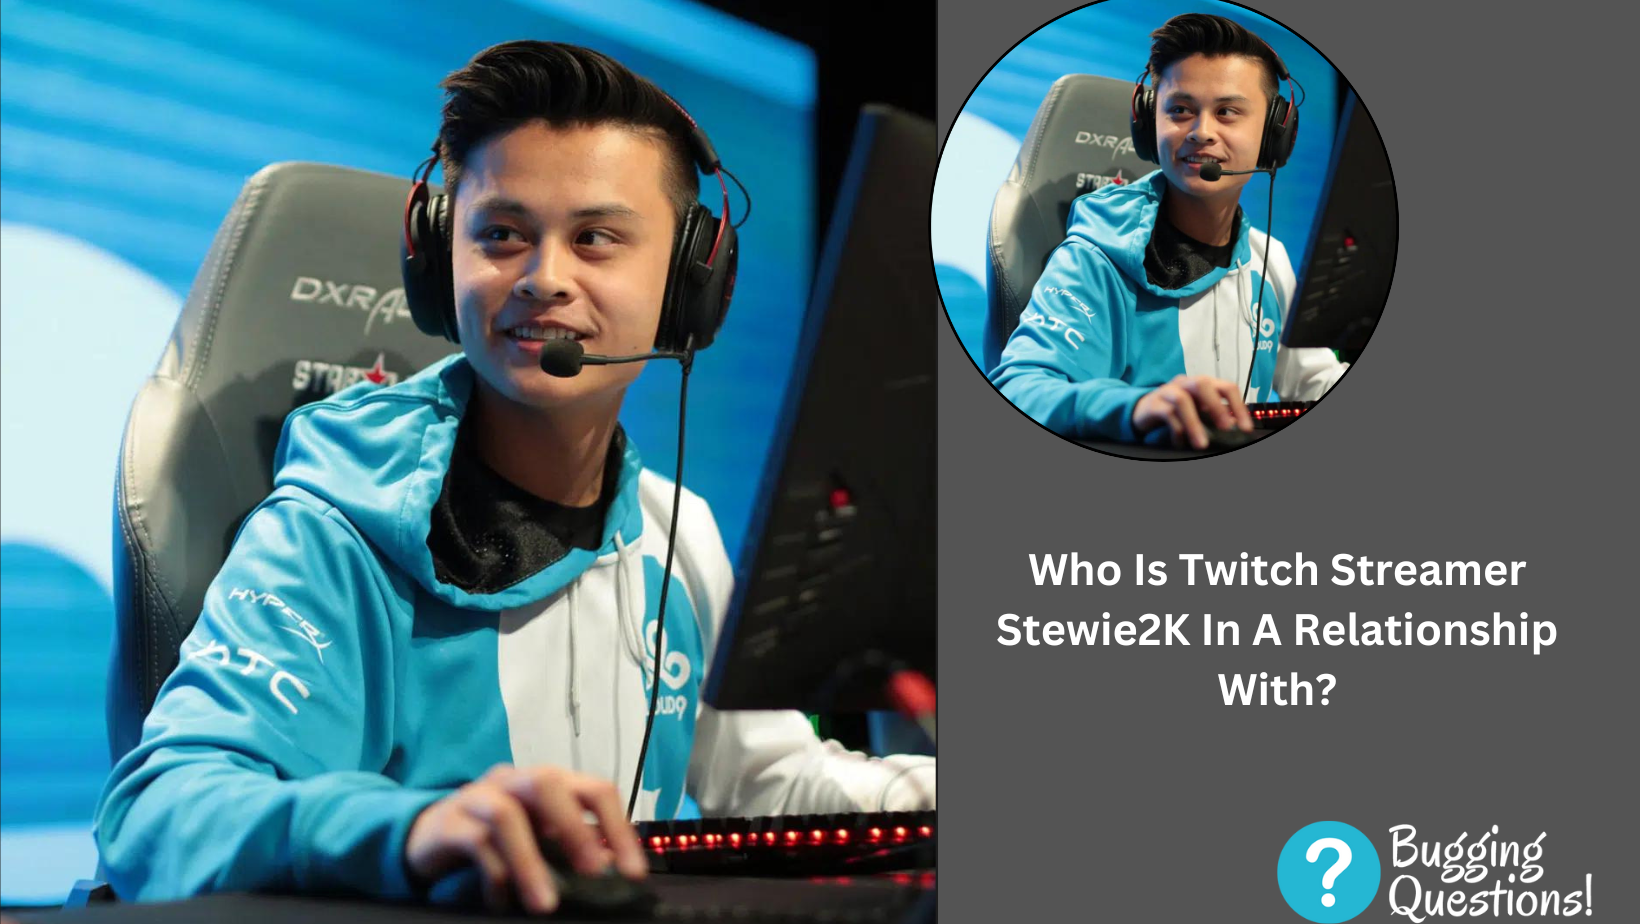 Who Is Twitch Streamer Stewie2K In A Relationship With?